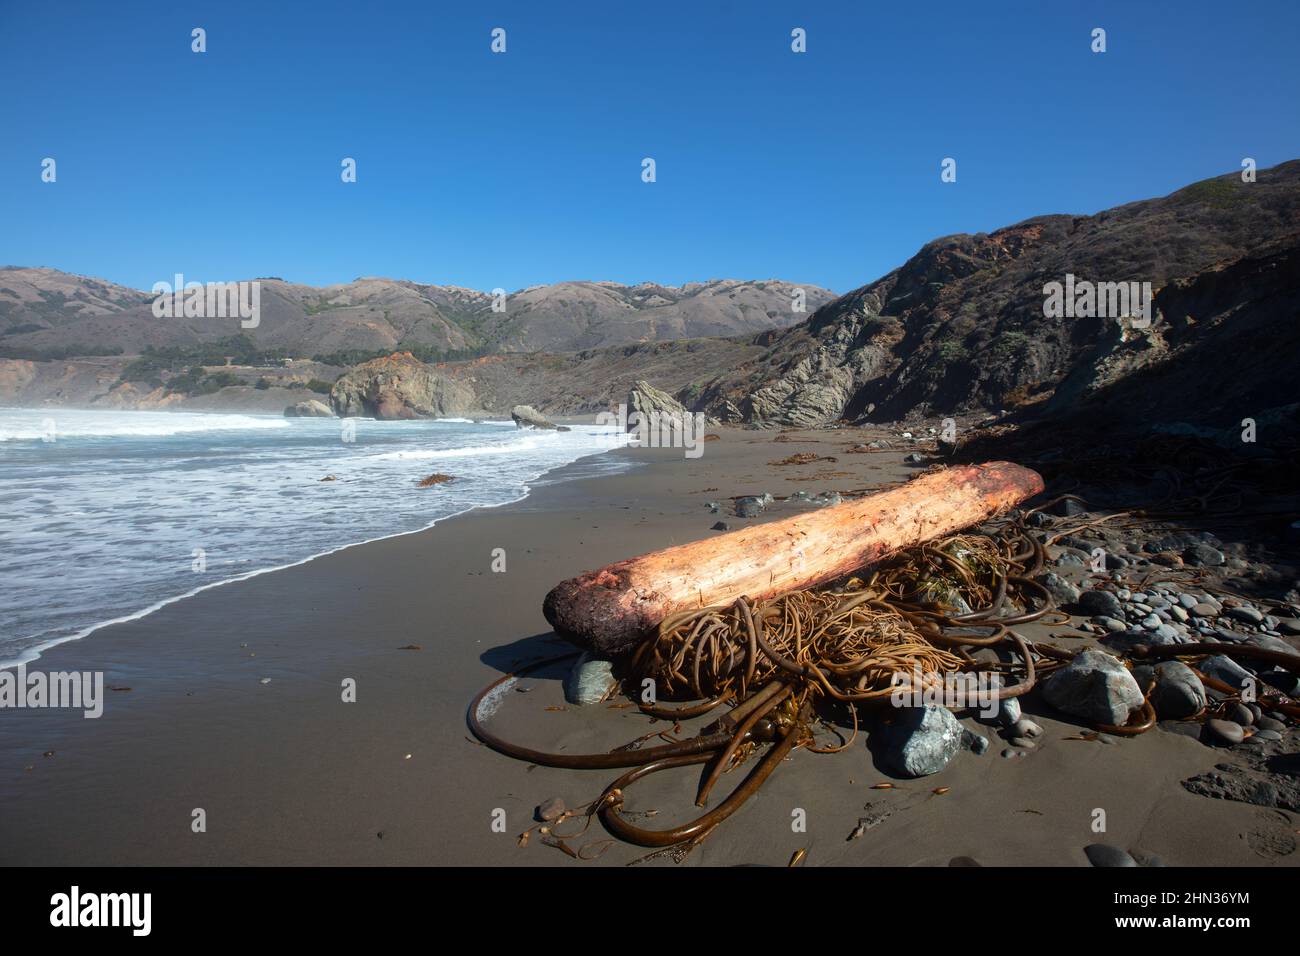 Driftwood log on Ragged Point beach at Big Sur on the Cental Coast of California United States Stock Photo